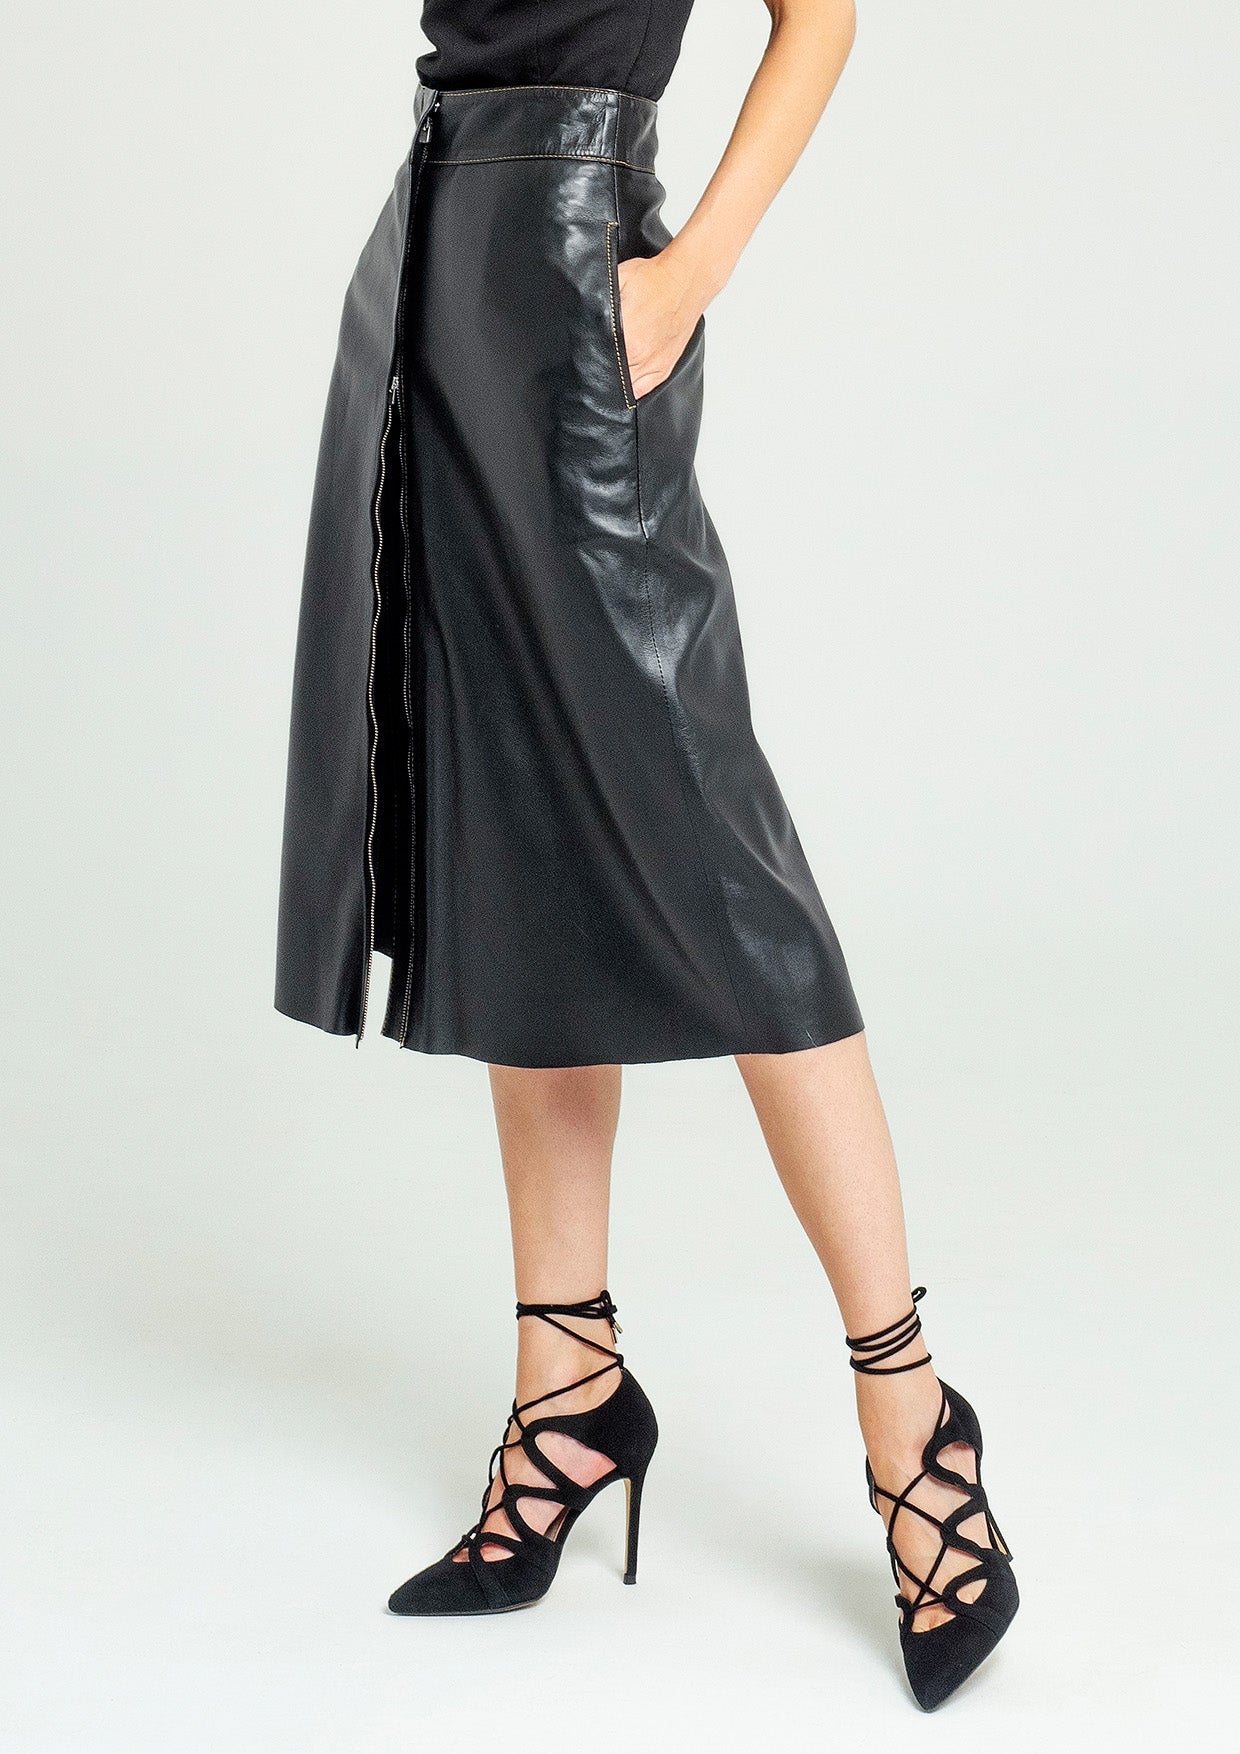 Leather skirt with front fastening